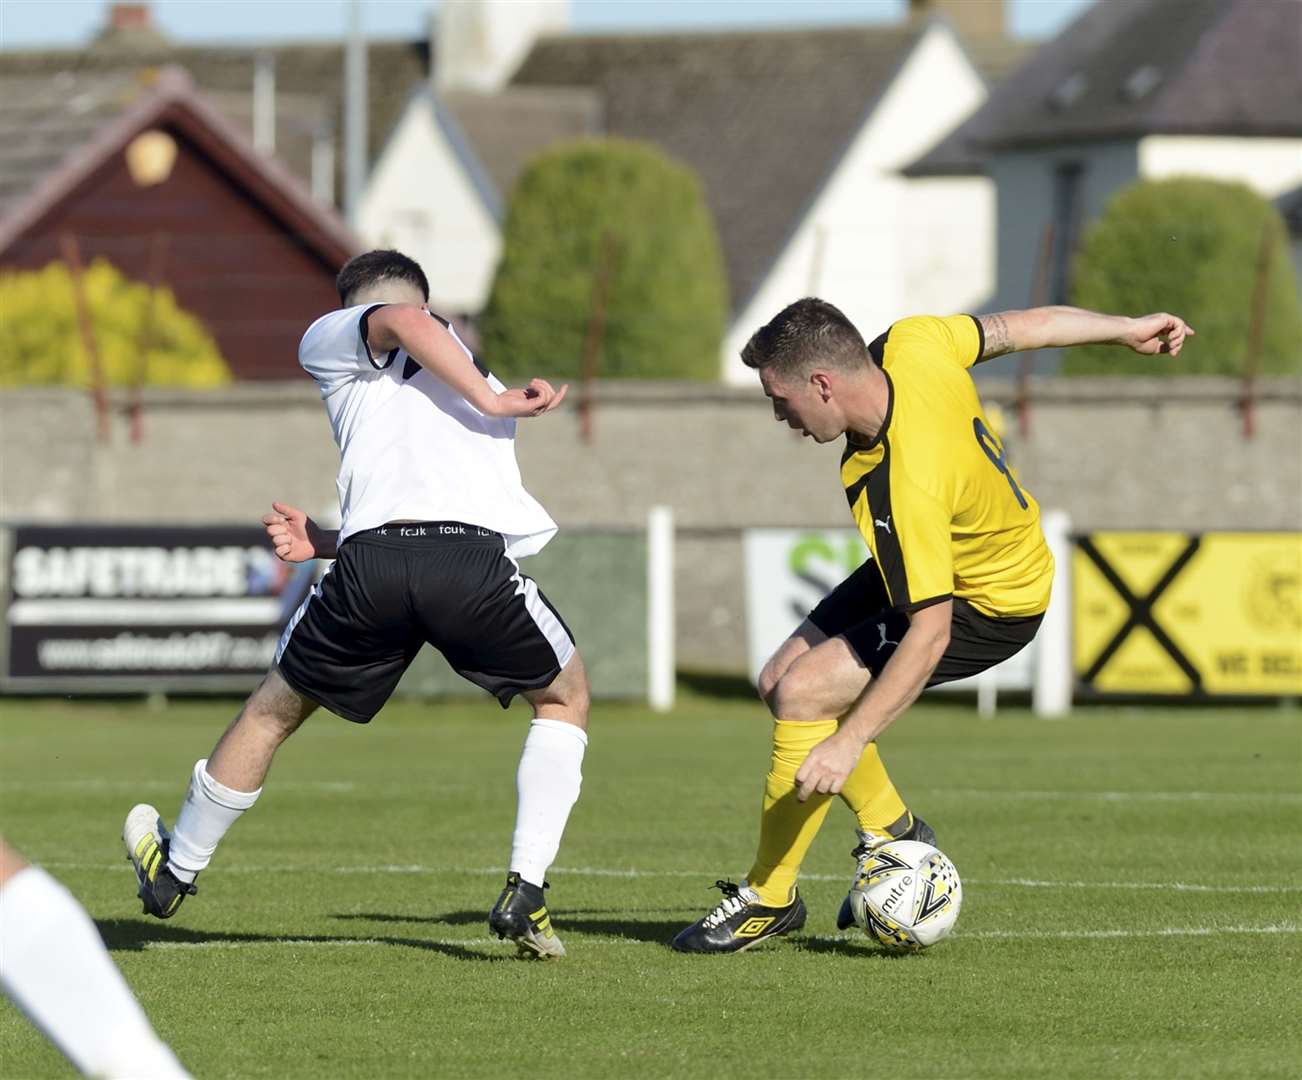 Glenn Main (right) in action for Nairn against Clach in January last year before lockdown wrecked his 18th season. Picture: James Mackenzie